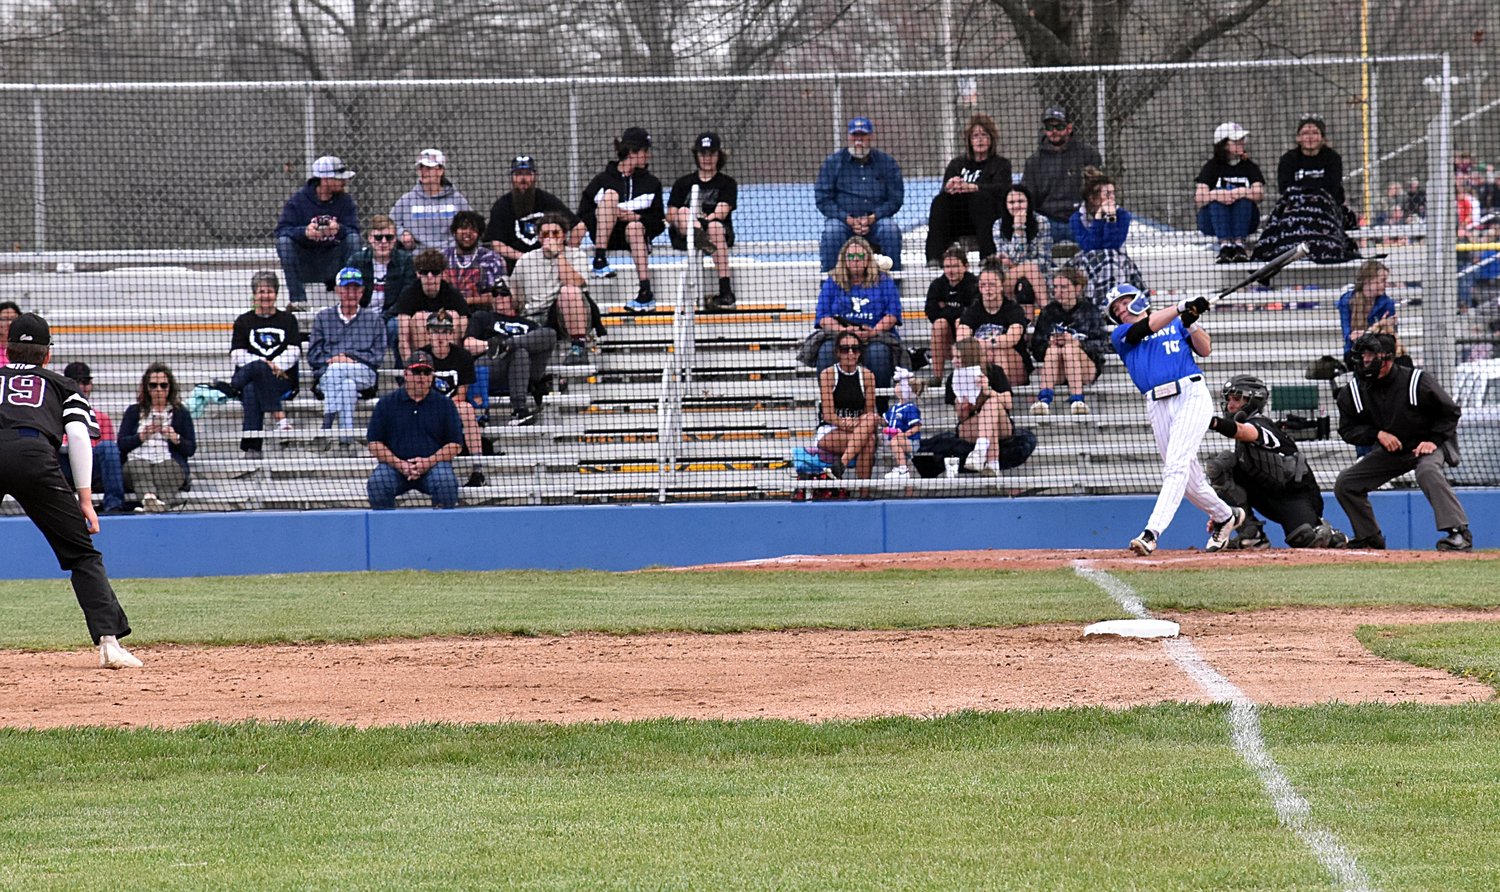 Marshfield junior Jackson Rovig was the first hitter to reach base Tuesday night, as he roped a single down the left-field line with one out in the first inning. Along with senior Sheldon Espy and freshman Henry Berkstresser, Rovig was cited by Blue Jay coach William Pate as one of the bright spots in the Jays' somewhat rocky season.